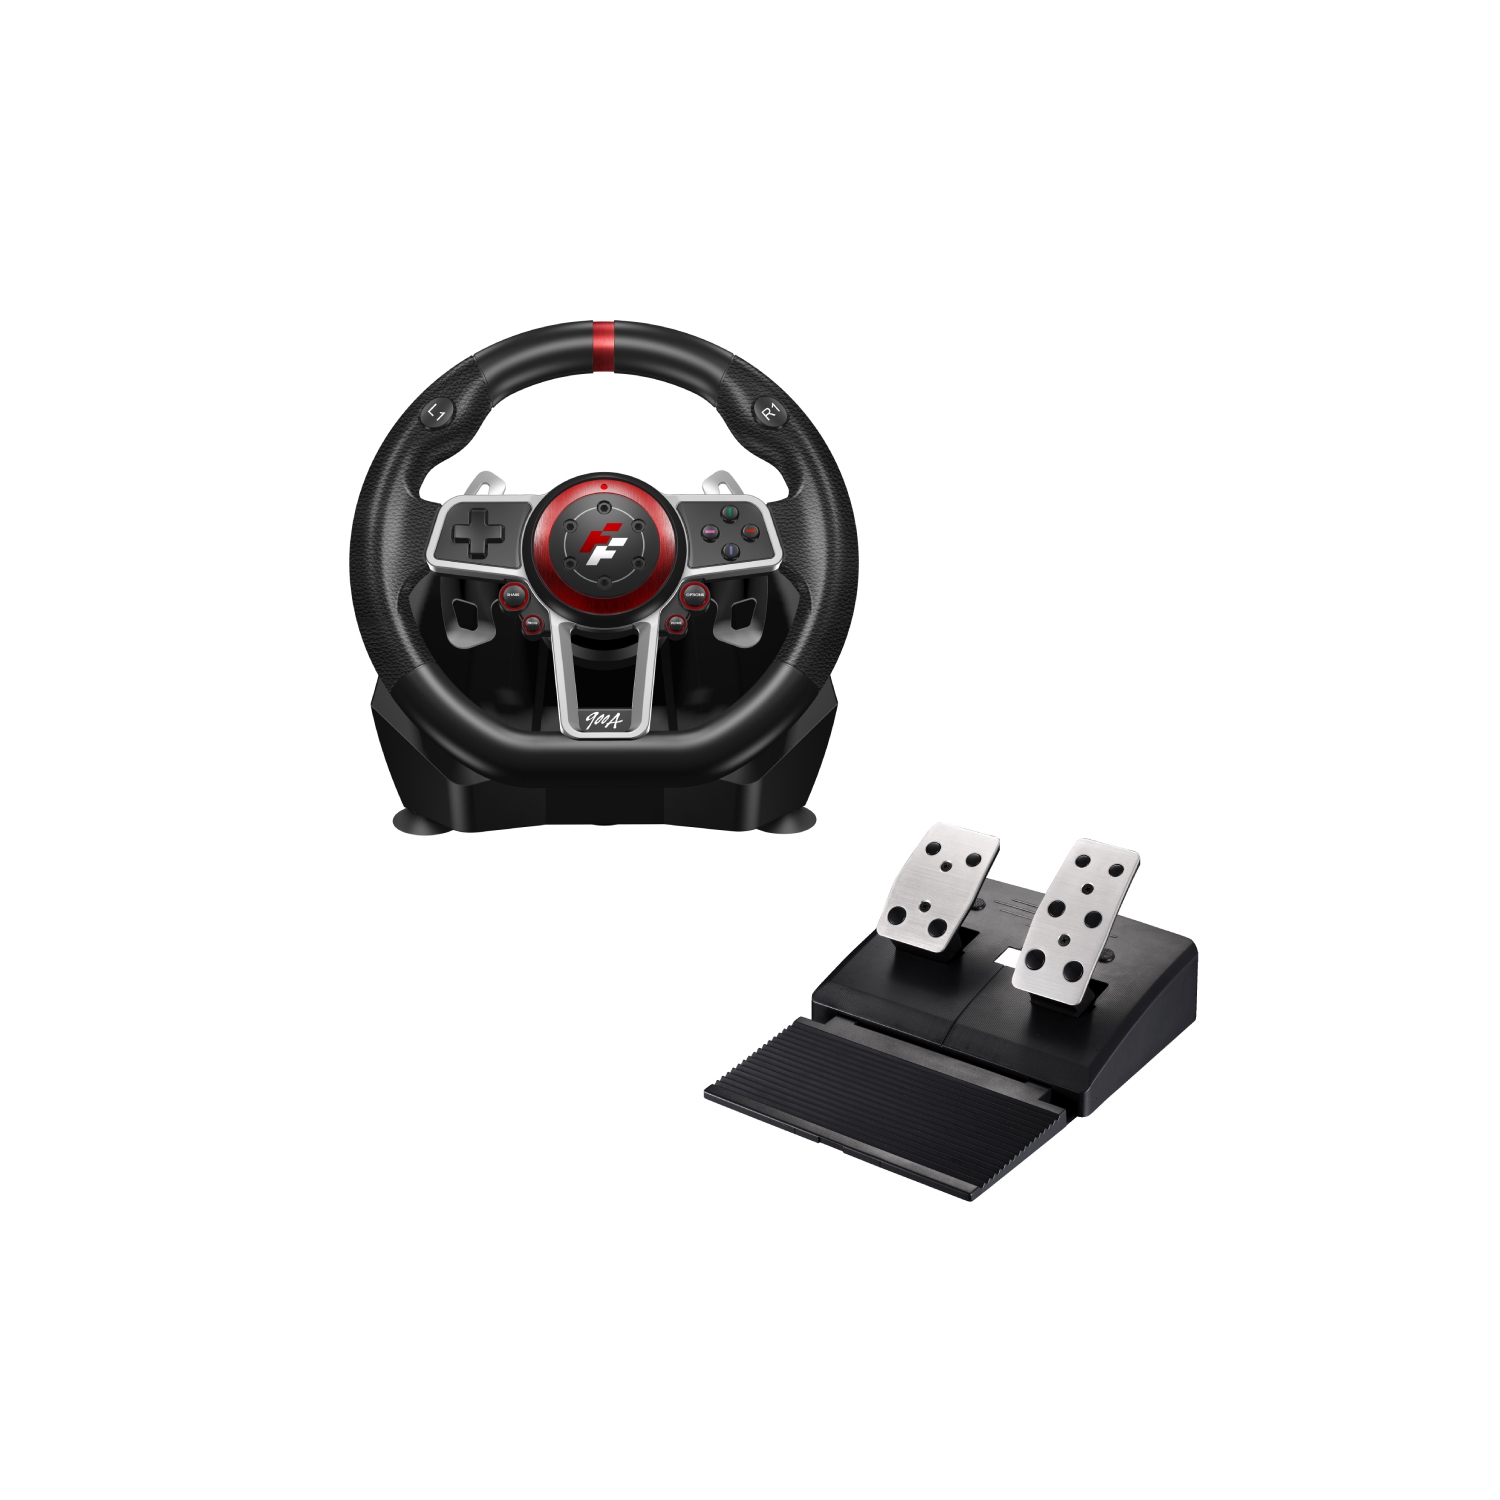 Flashfire ES900A SUZUKA Racing Wheel Set - Compatible with PC, PS3, PS4, Xbox 360, XBOX ONE, XBOX series X, XBOX series S and Nintendo Switch.